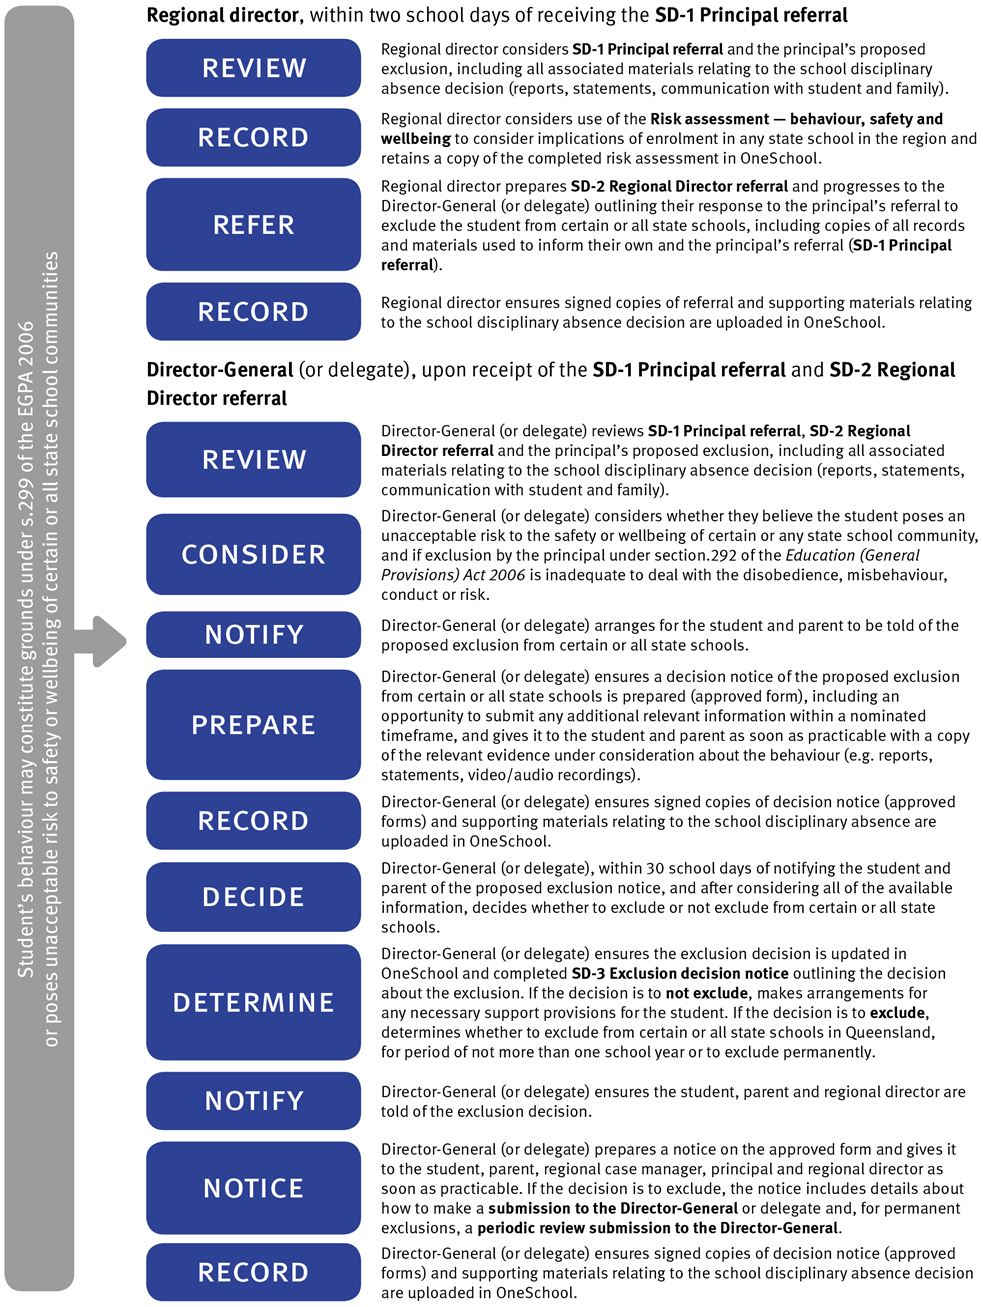 Continued flowchart of process for exclusion by the Director-General (or delegate) for certain Queensland state schools or all state schools where a student is enrolled at the school: 19. Review 20. Record 21. Refer 22. Record  Note: Director-General (or delegate) upon receipt of the SD-1 Principal referral and SD-2 Regional Director referral  23. Review 24. Consider 25. Notify 26. Prepare 27. Record 28. Decide 29. Determine 30. Notify 31. Notice 32. Record